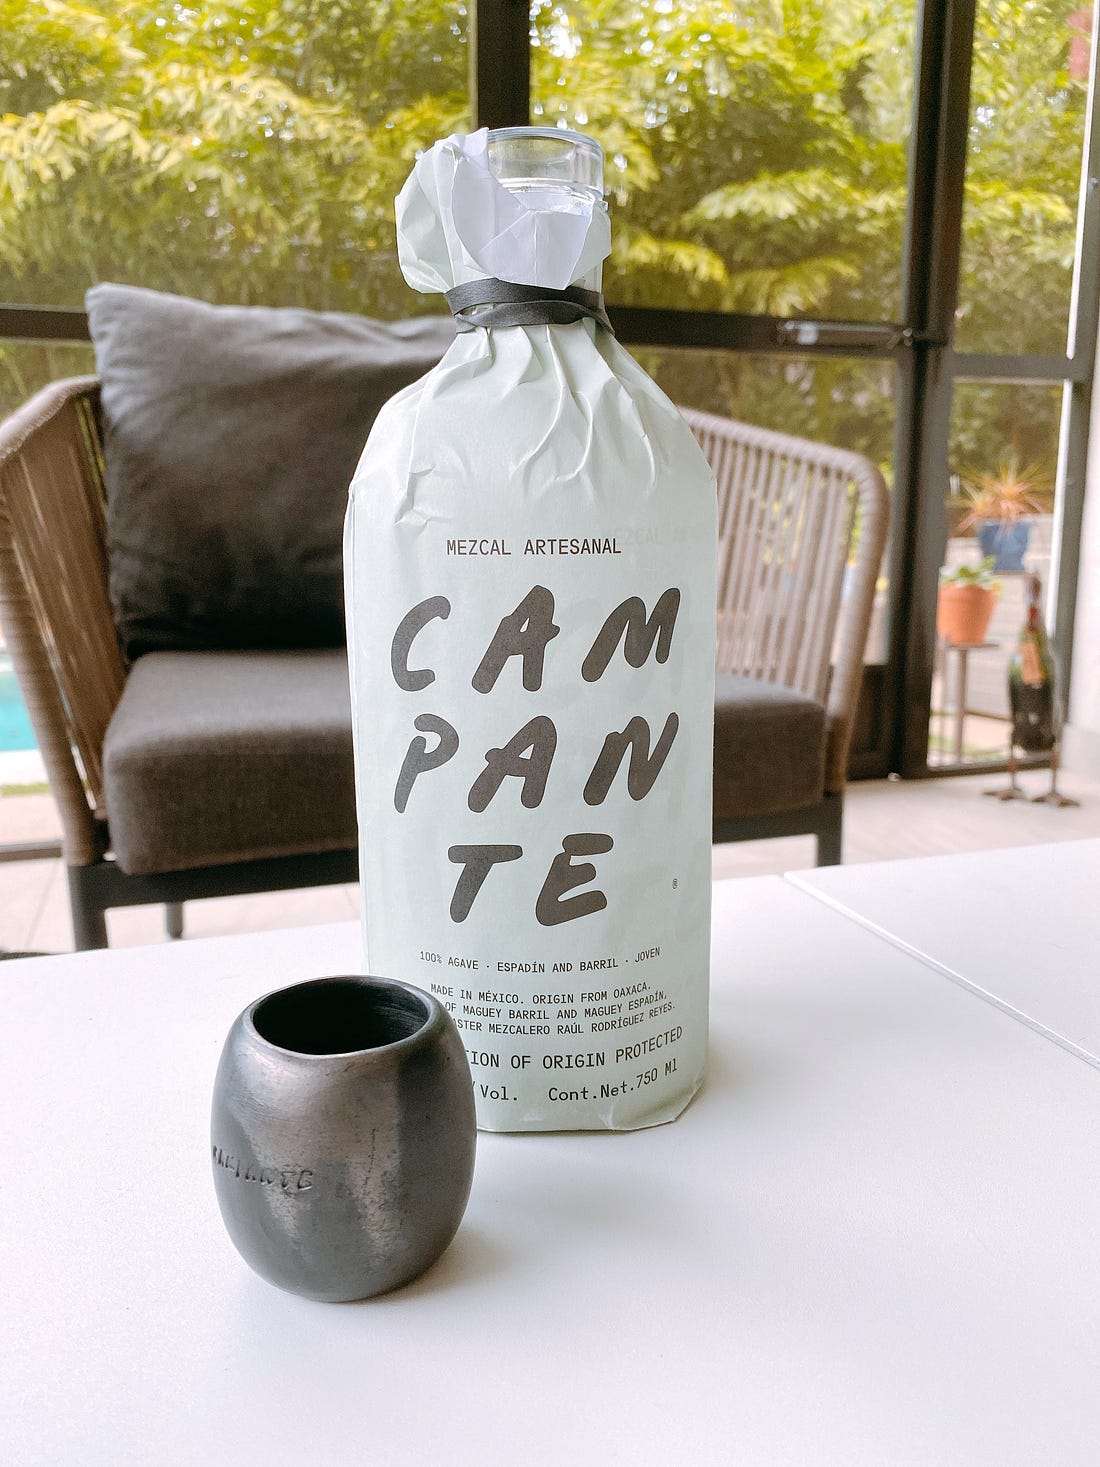 A bottle of Mezcal Campante and a traditional clay cup is in the foreground. In the background, a gray chair sits in front of a screen, behind which there is a pool, potted plants, and lush tropical greenery.